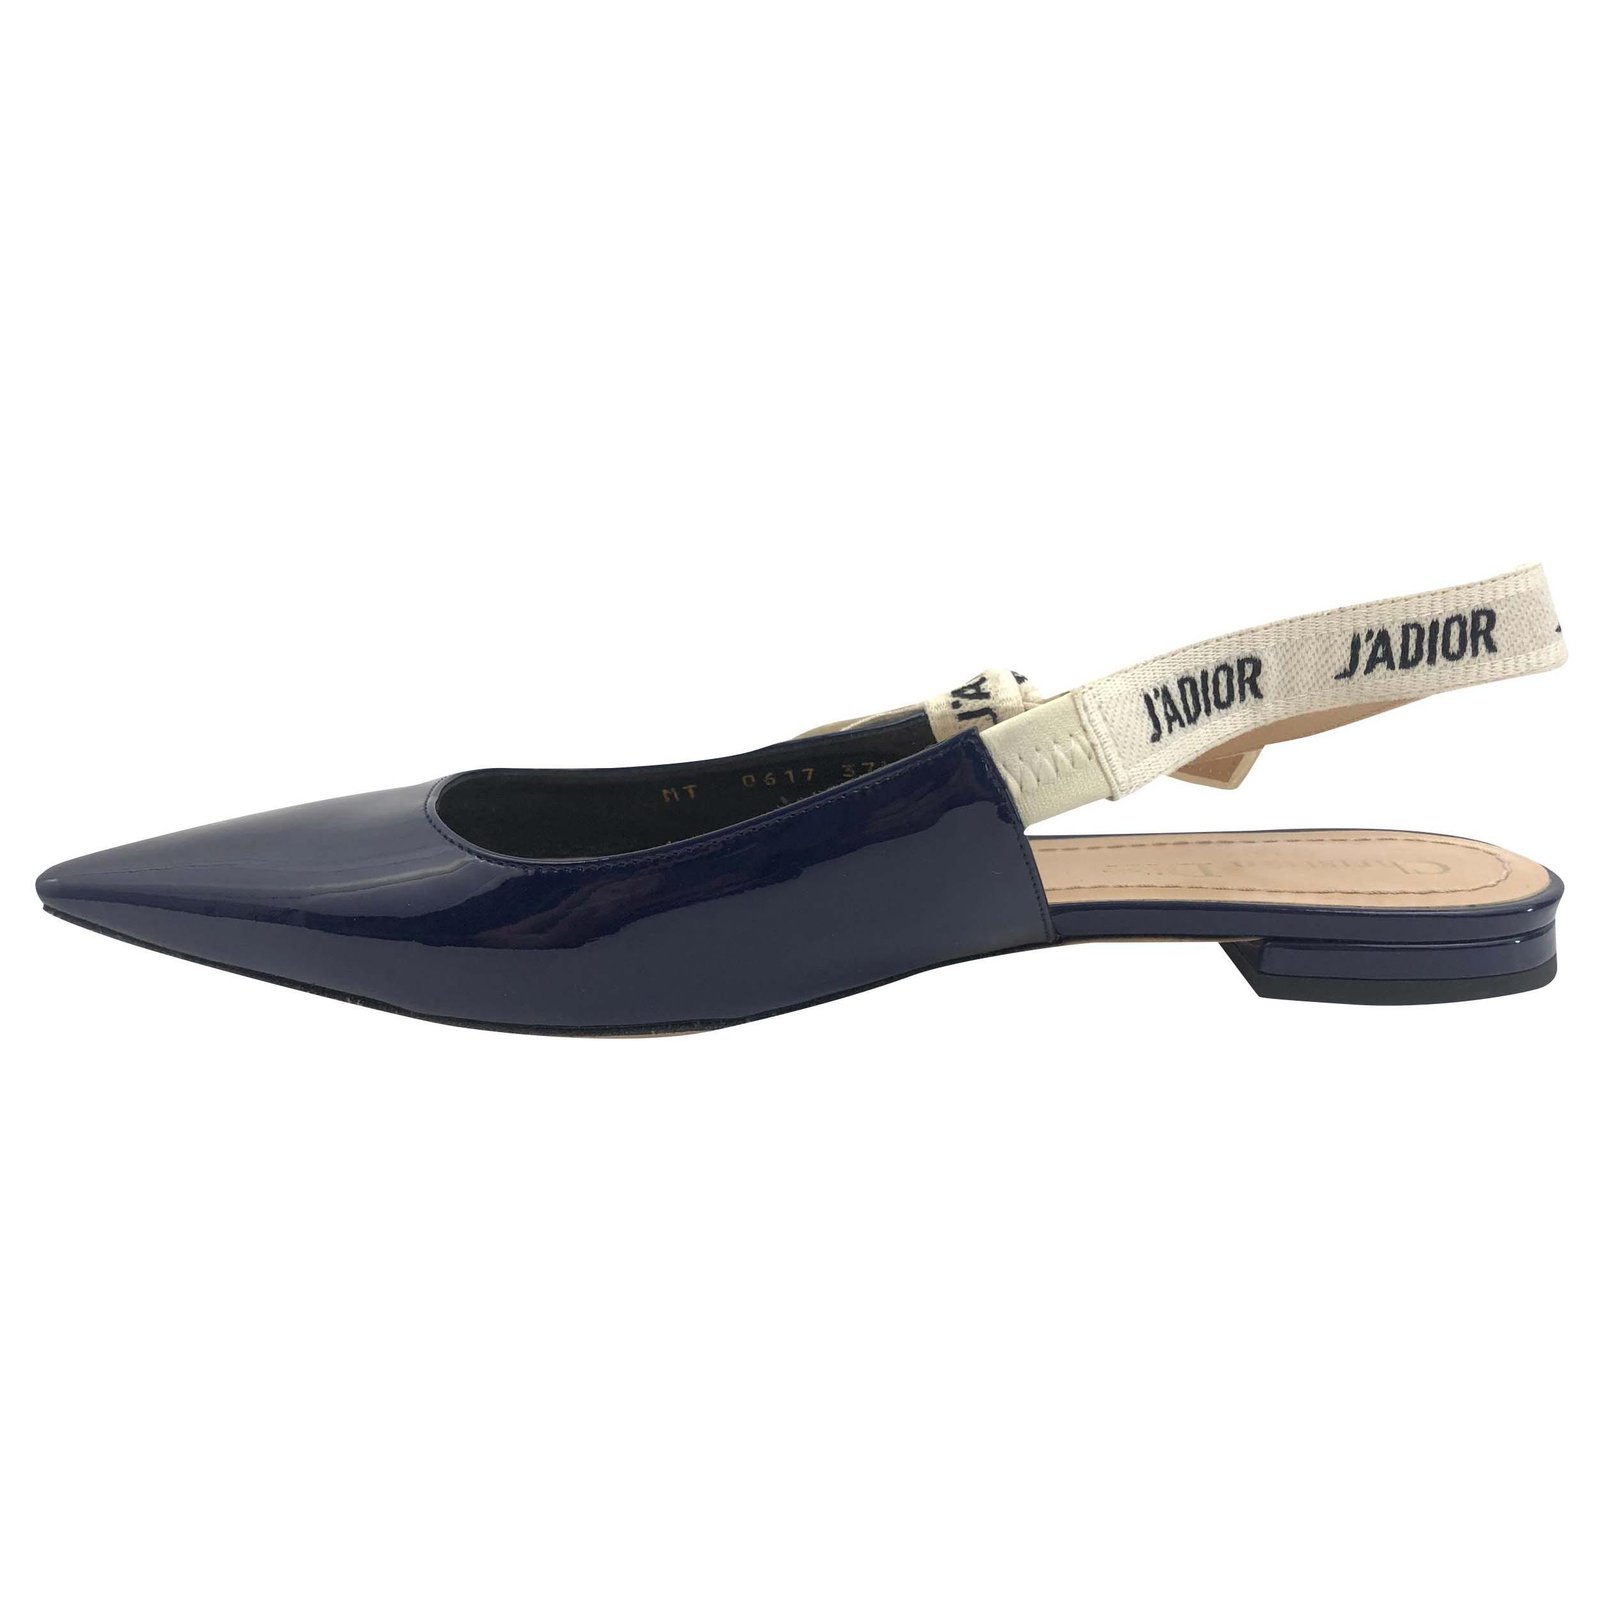 navy patent leather flats